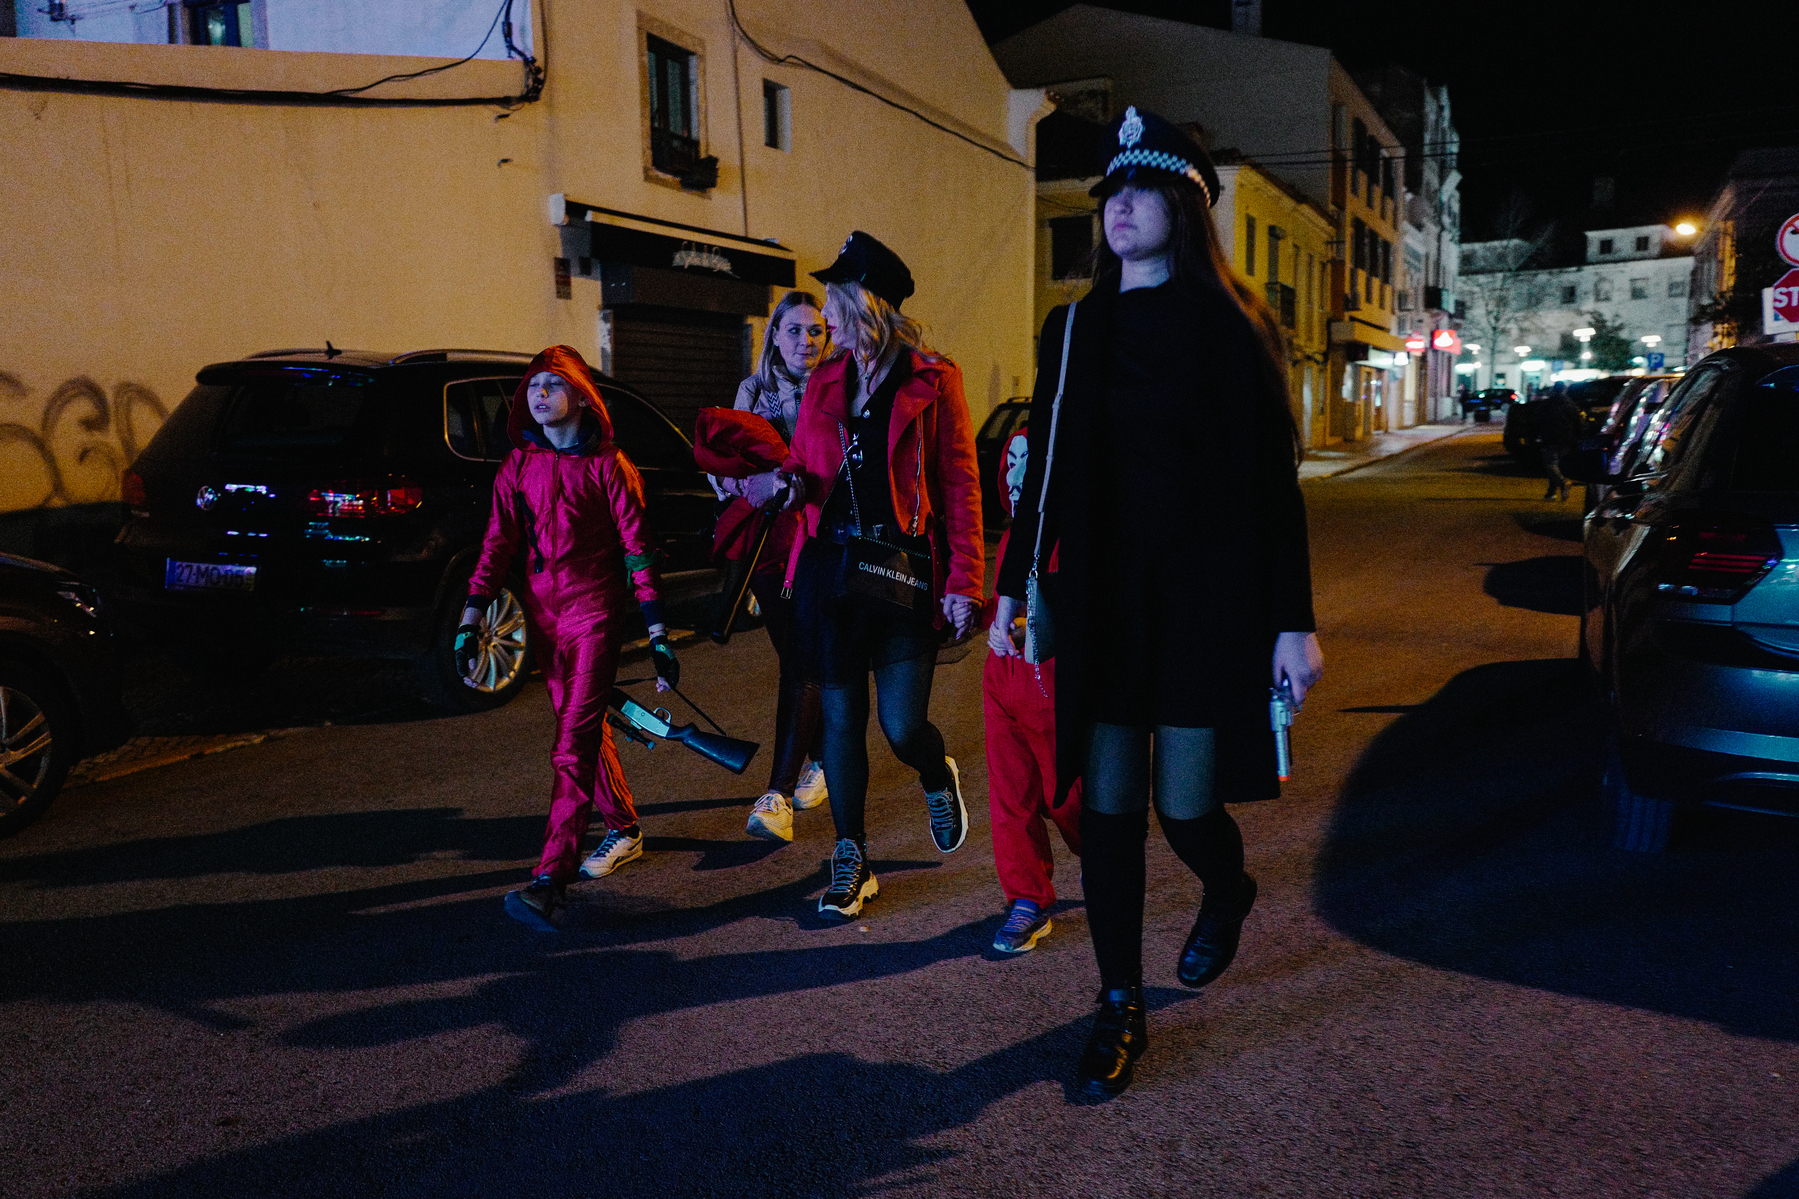 A group of individuals walking at night on a city street. One person is wearing a vibrant pink suit, another is in a red jacket with a graphic print, and a third is dressed in a black coat with a police hat.